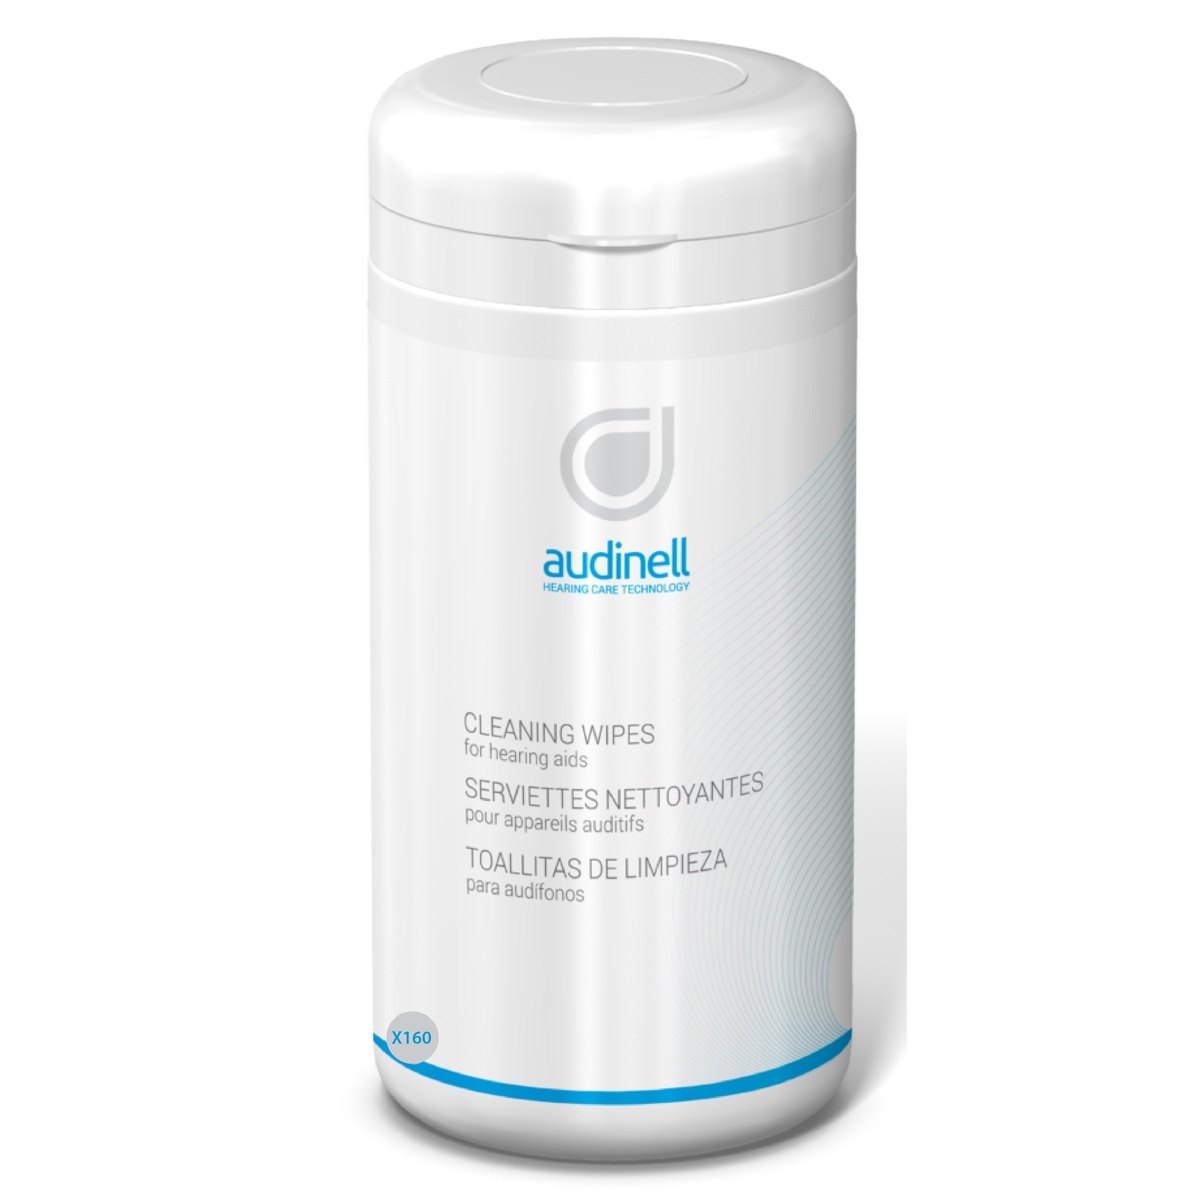 Audinell Cleaning Wipes - 160 Wipe Canister